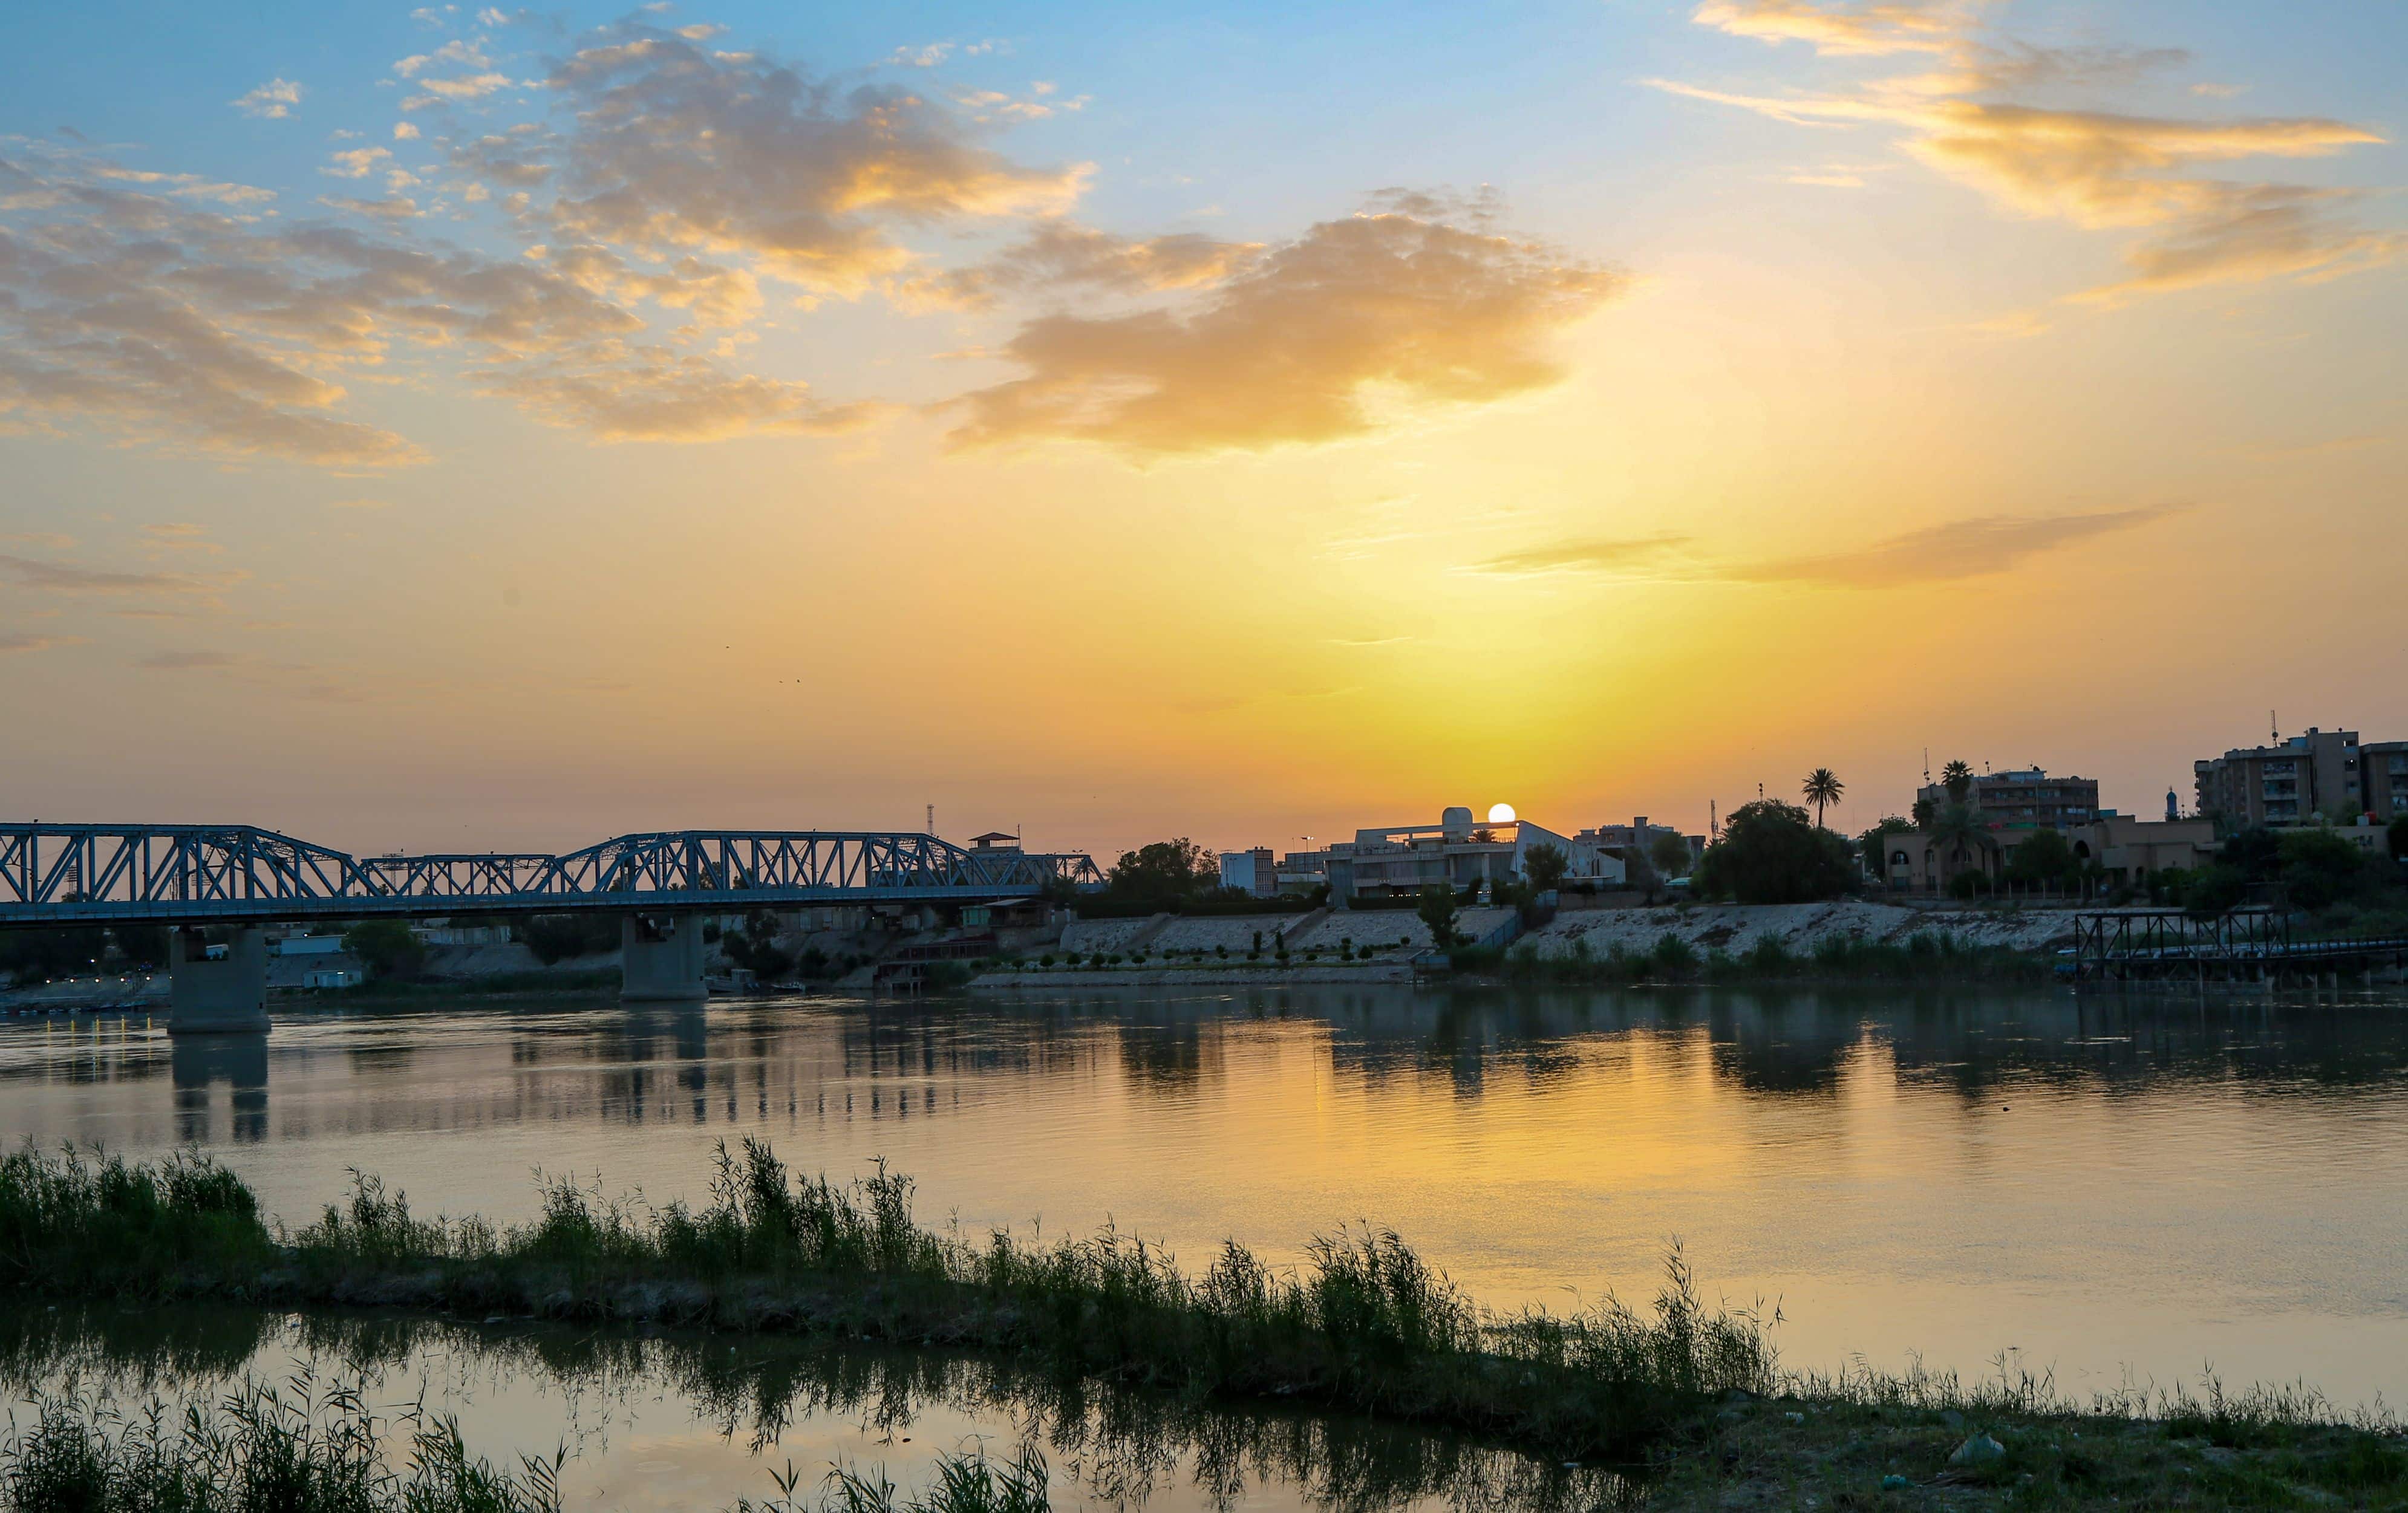 Baghdad, Iraq – April 4, 2020: photo for sunrise in Baghdad city in Iraq, which showing the Sarafia Bridge and Tigris river, and many of buildings.